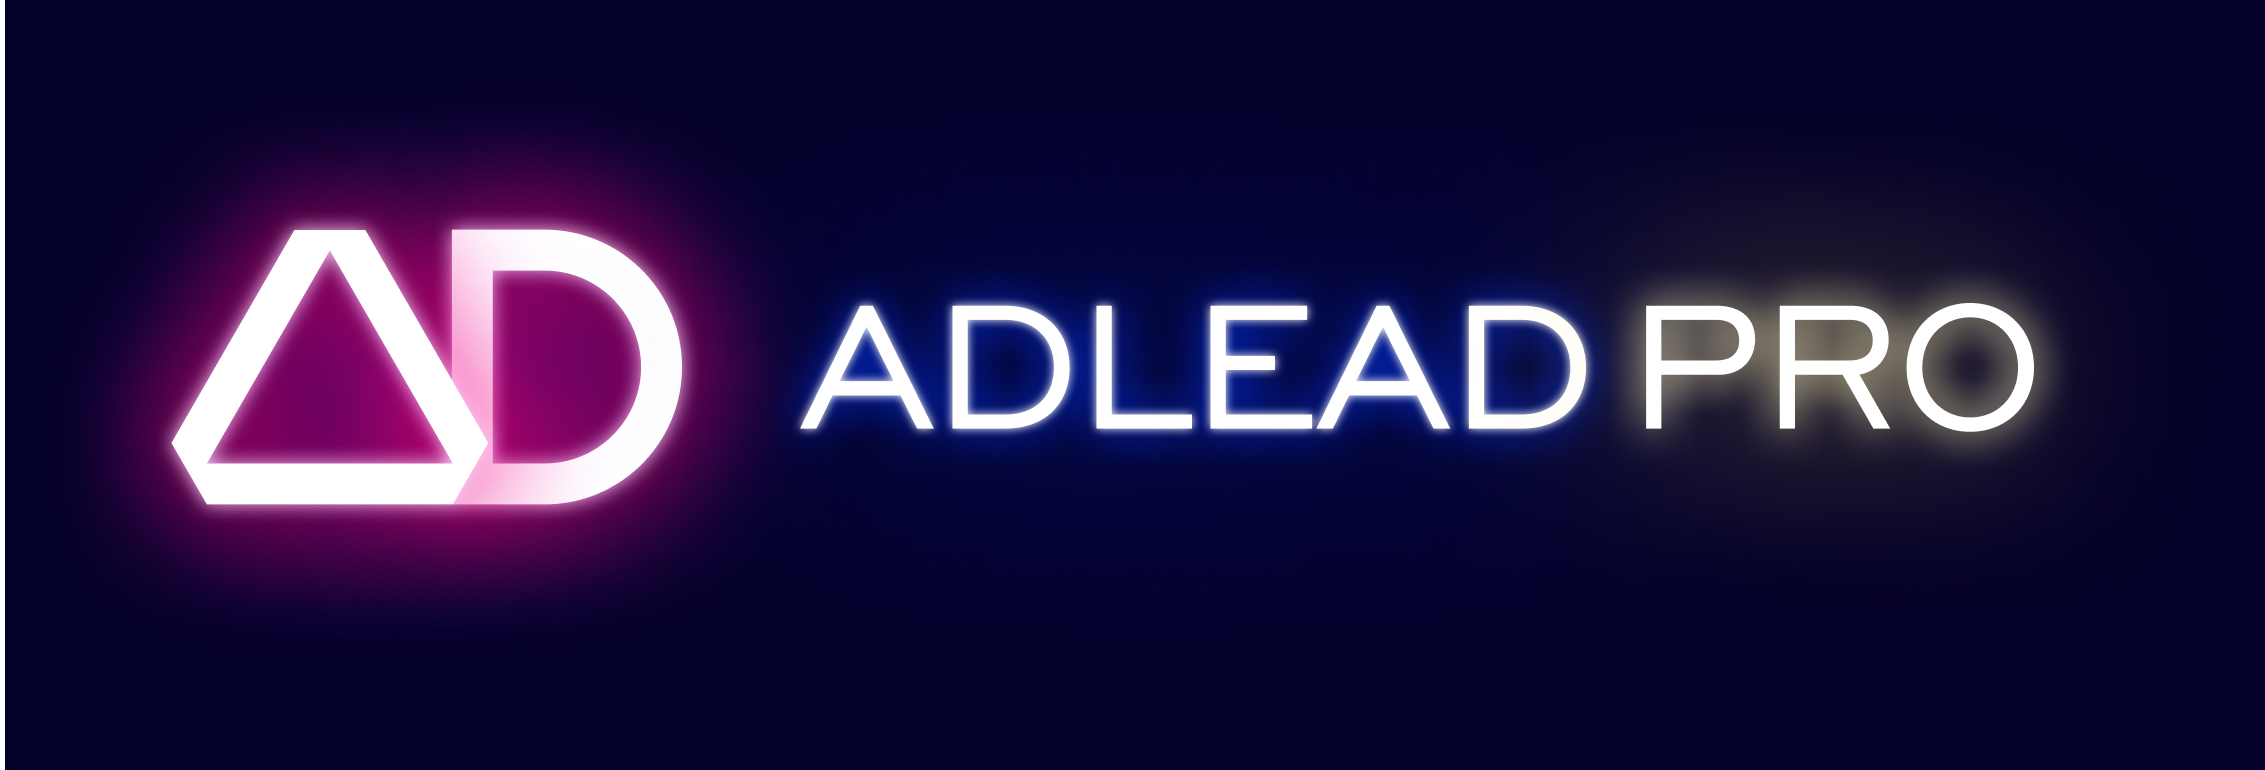 Adlead-top5-pin-3place-9march